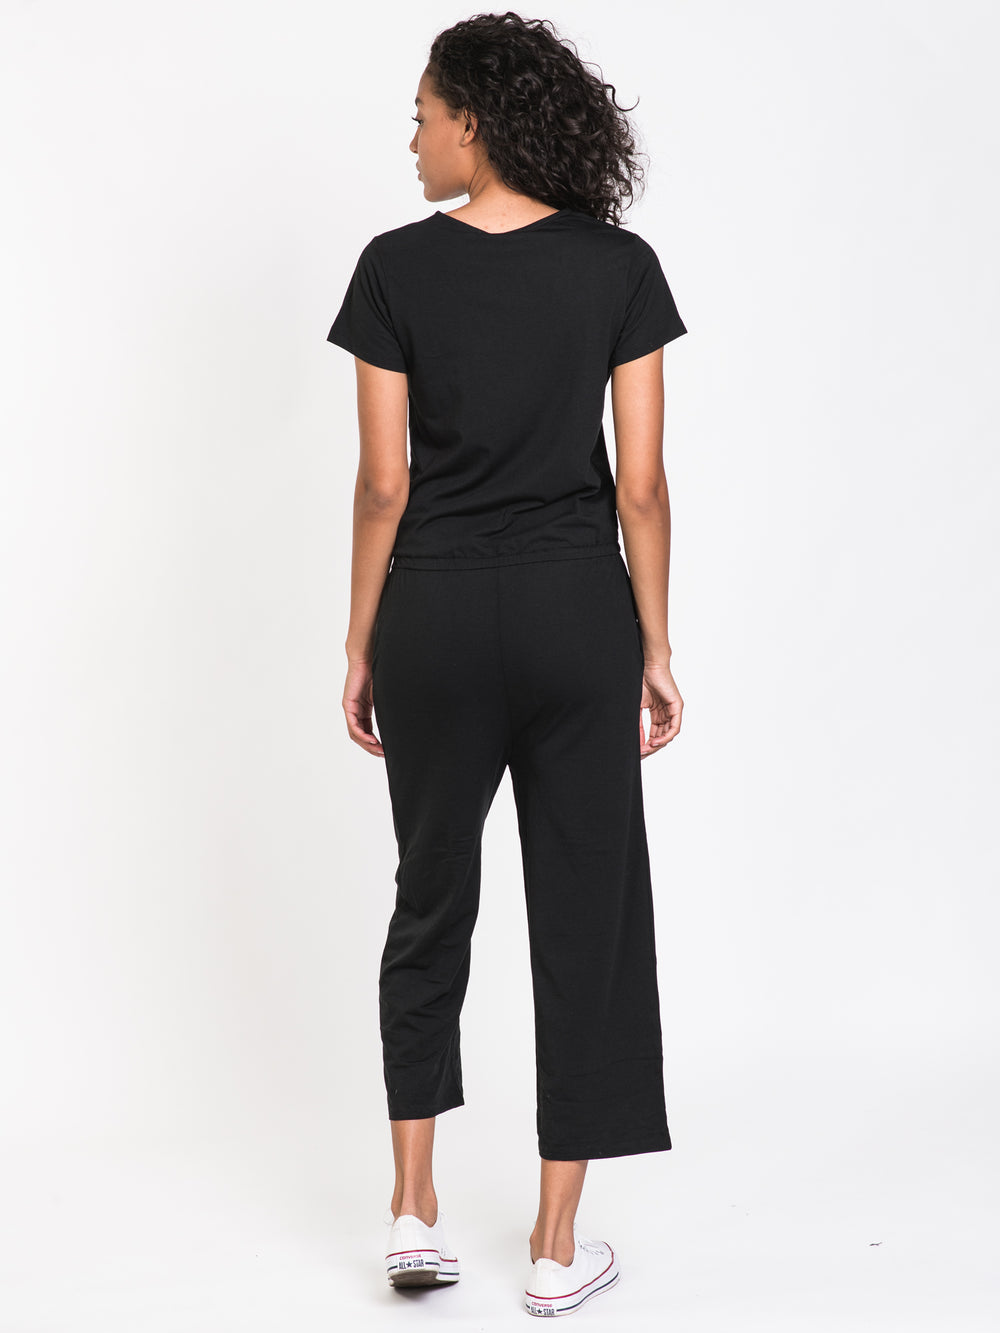 TENTREE BLAKELY SHORT SLEEVE JUMPSUIT - CLEARANCE